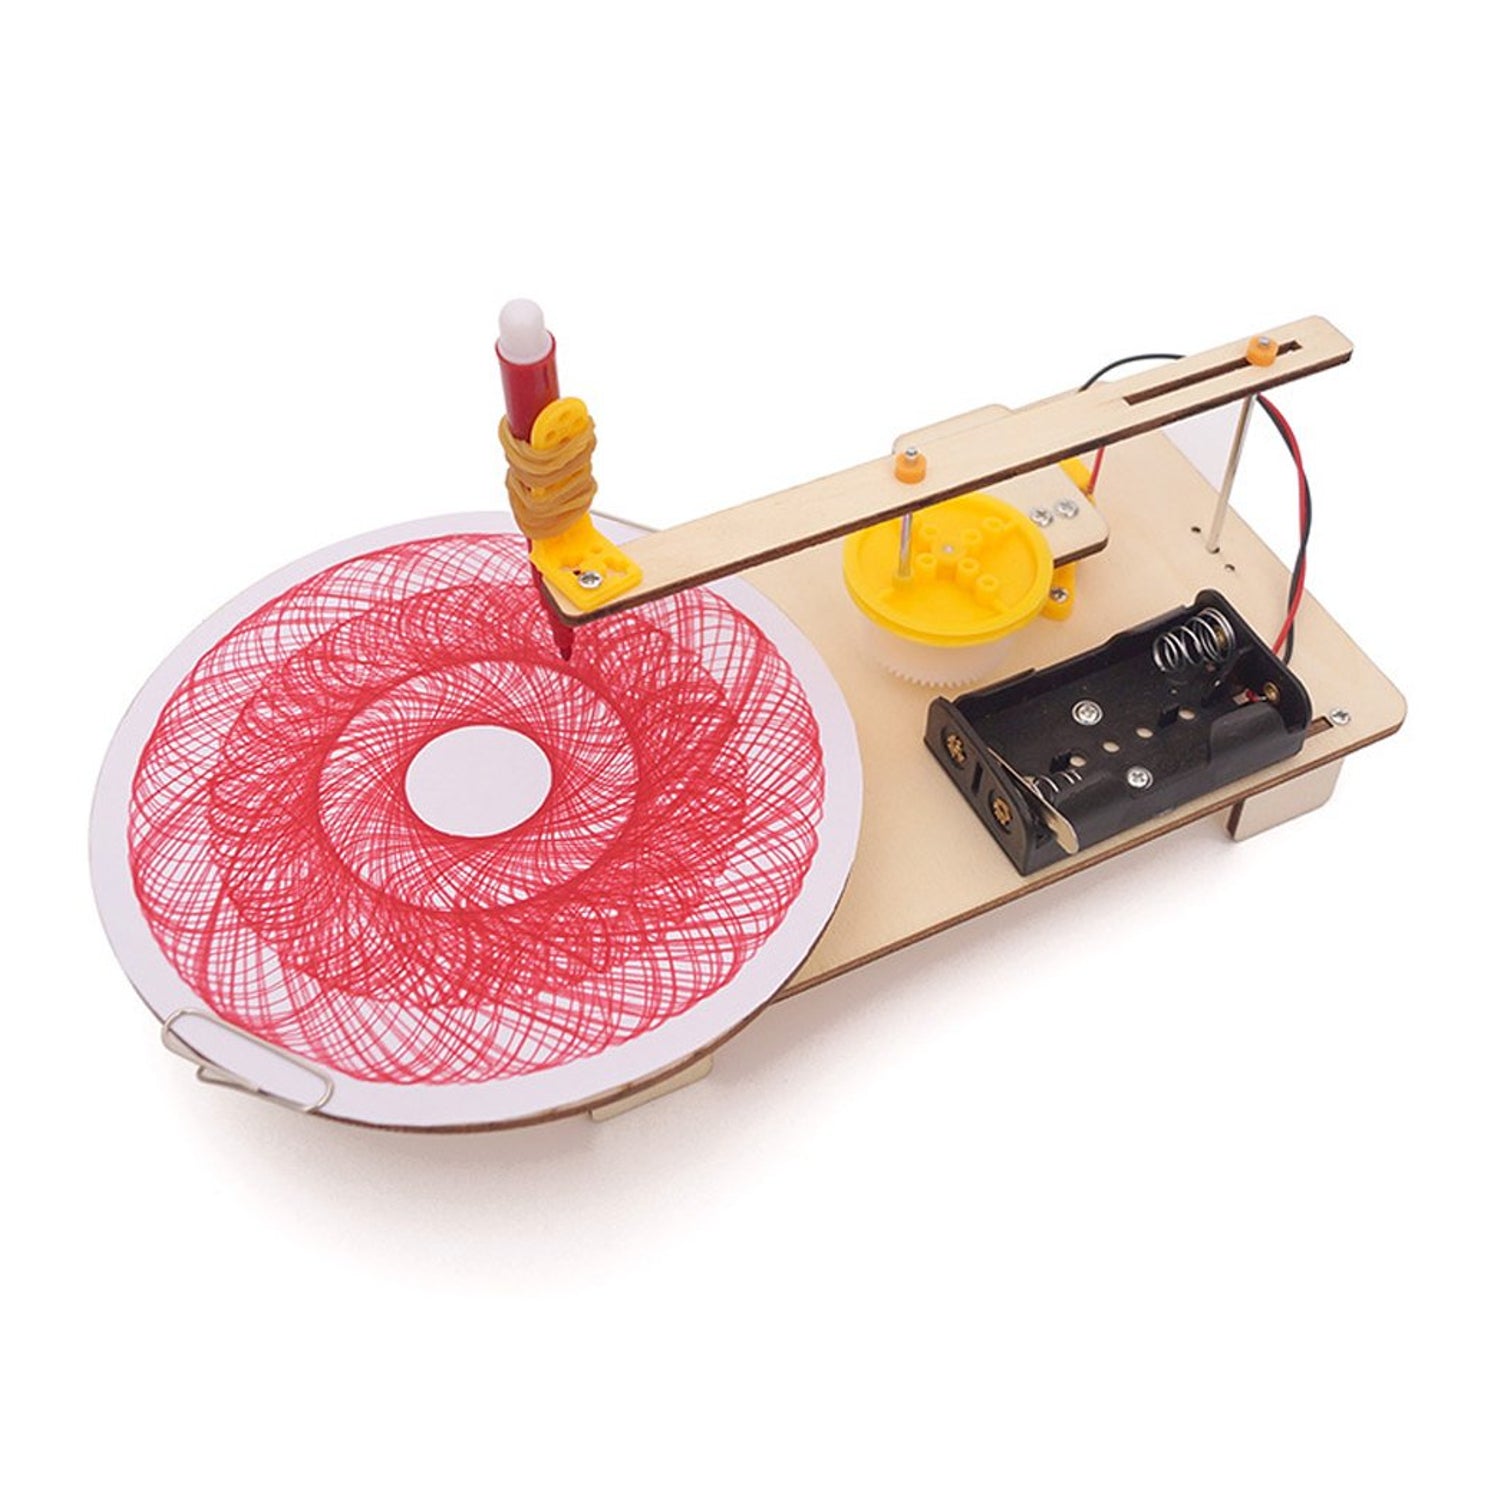 diy-automatic-graph-plotter-educational-toy-learning-science-experiments-kit.jpg